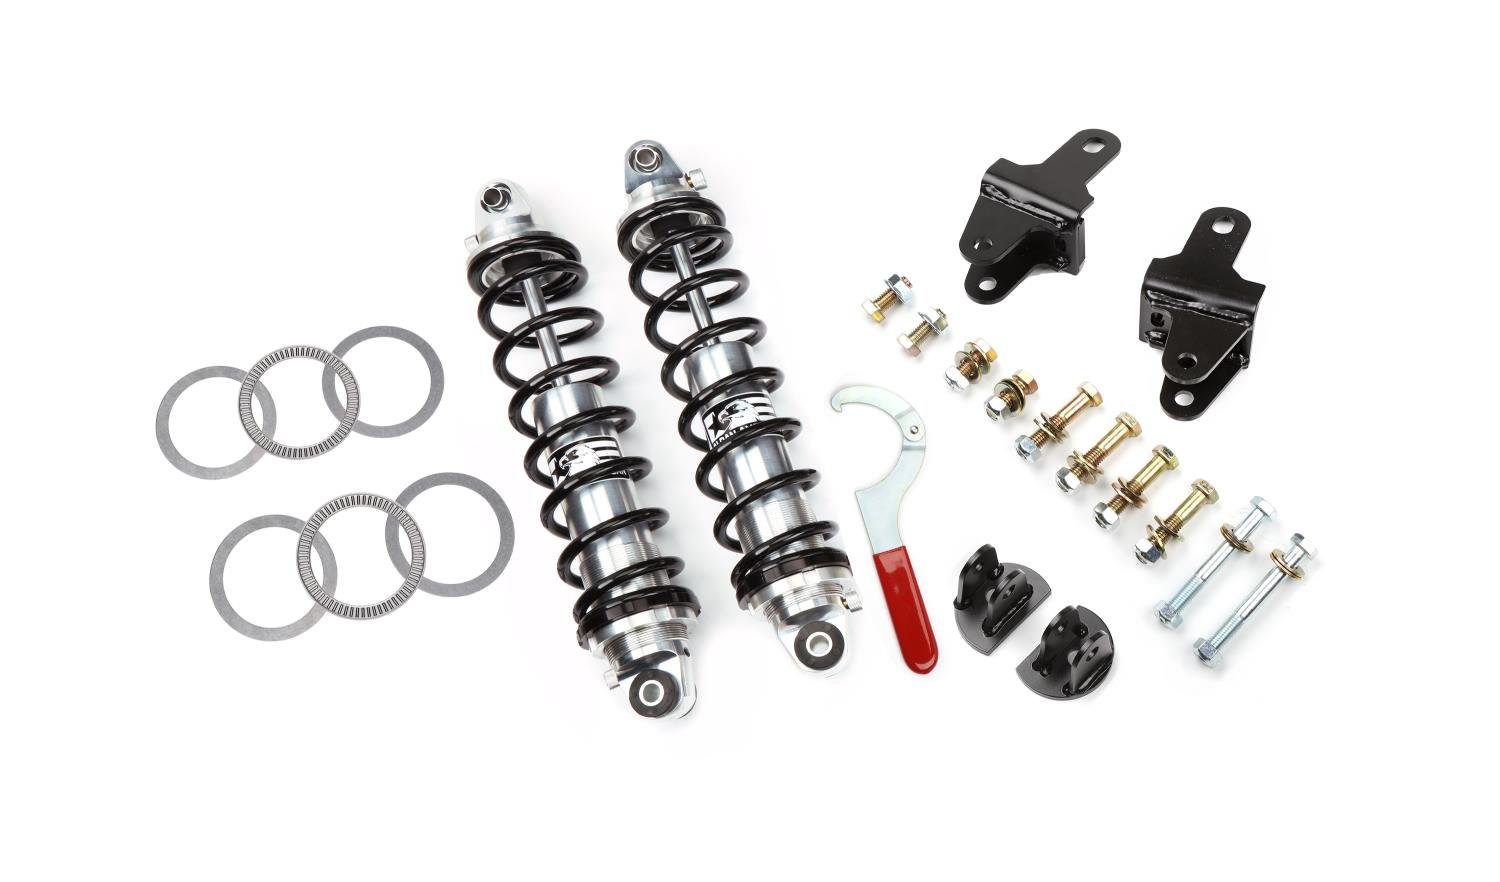 Rear Coil-Over Kit 1979-2004 Ford Mustang, Double-Adjustable [160 lbs./in. Springs]